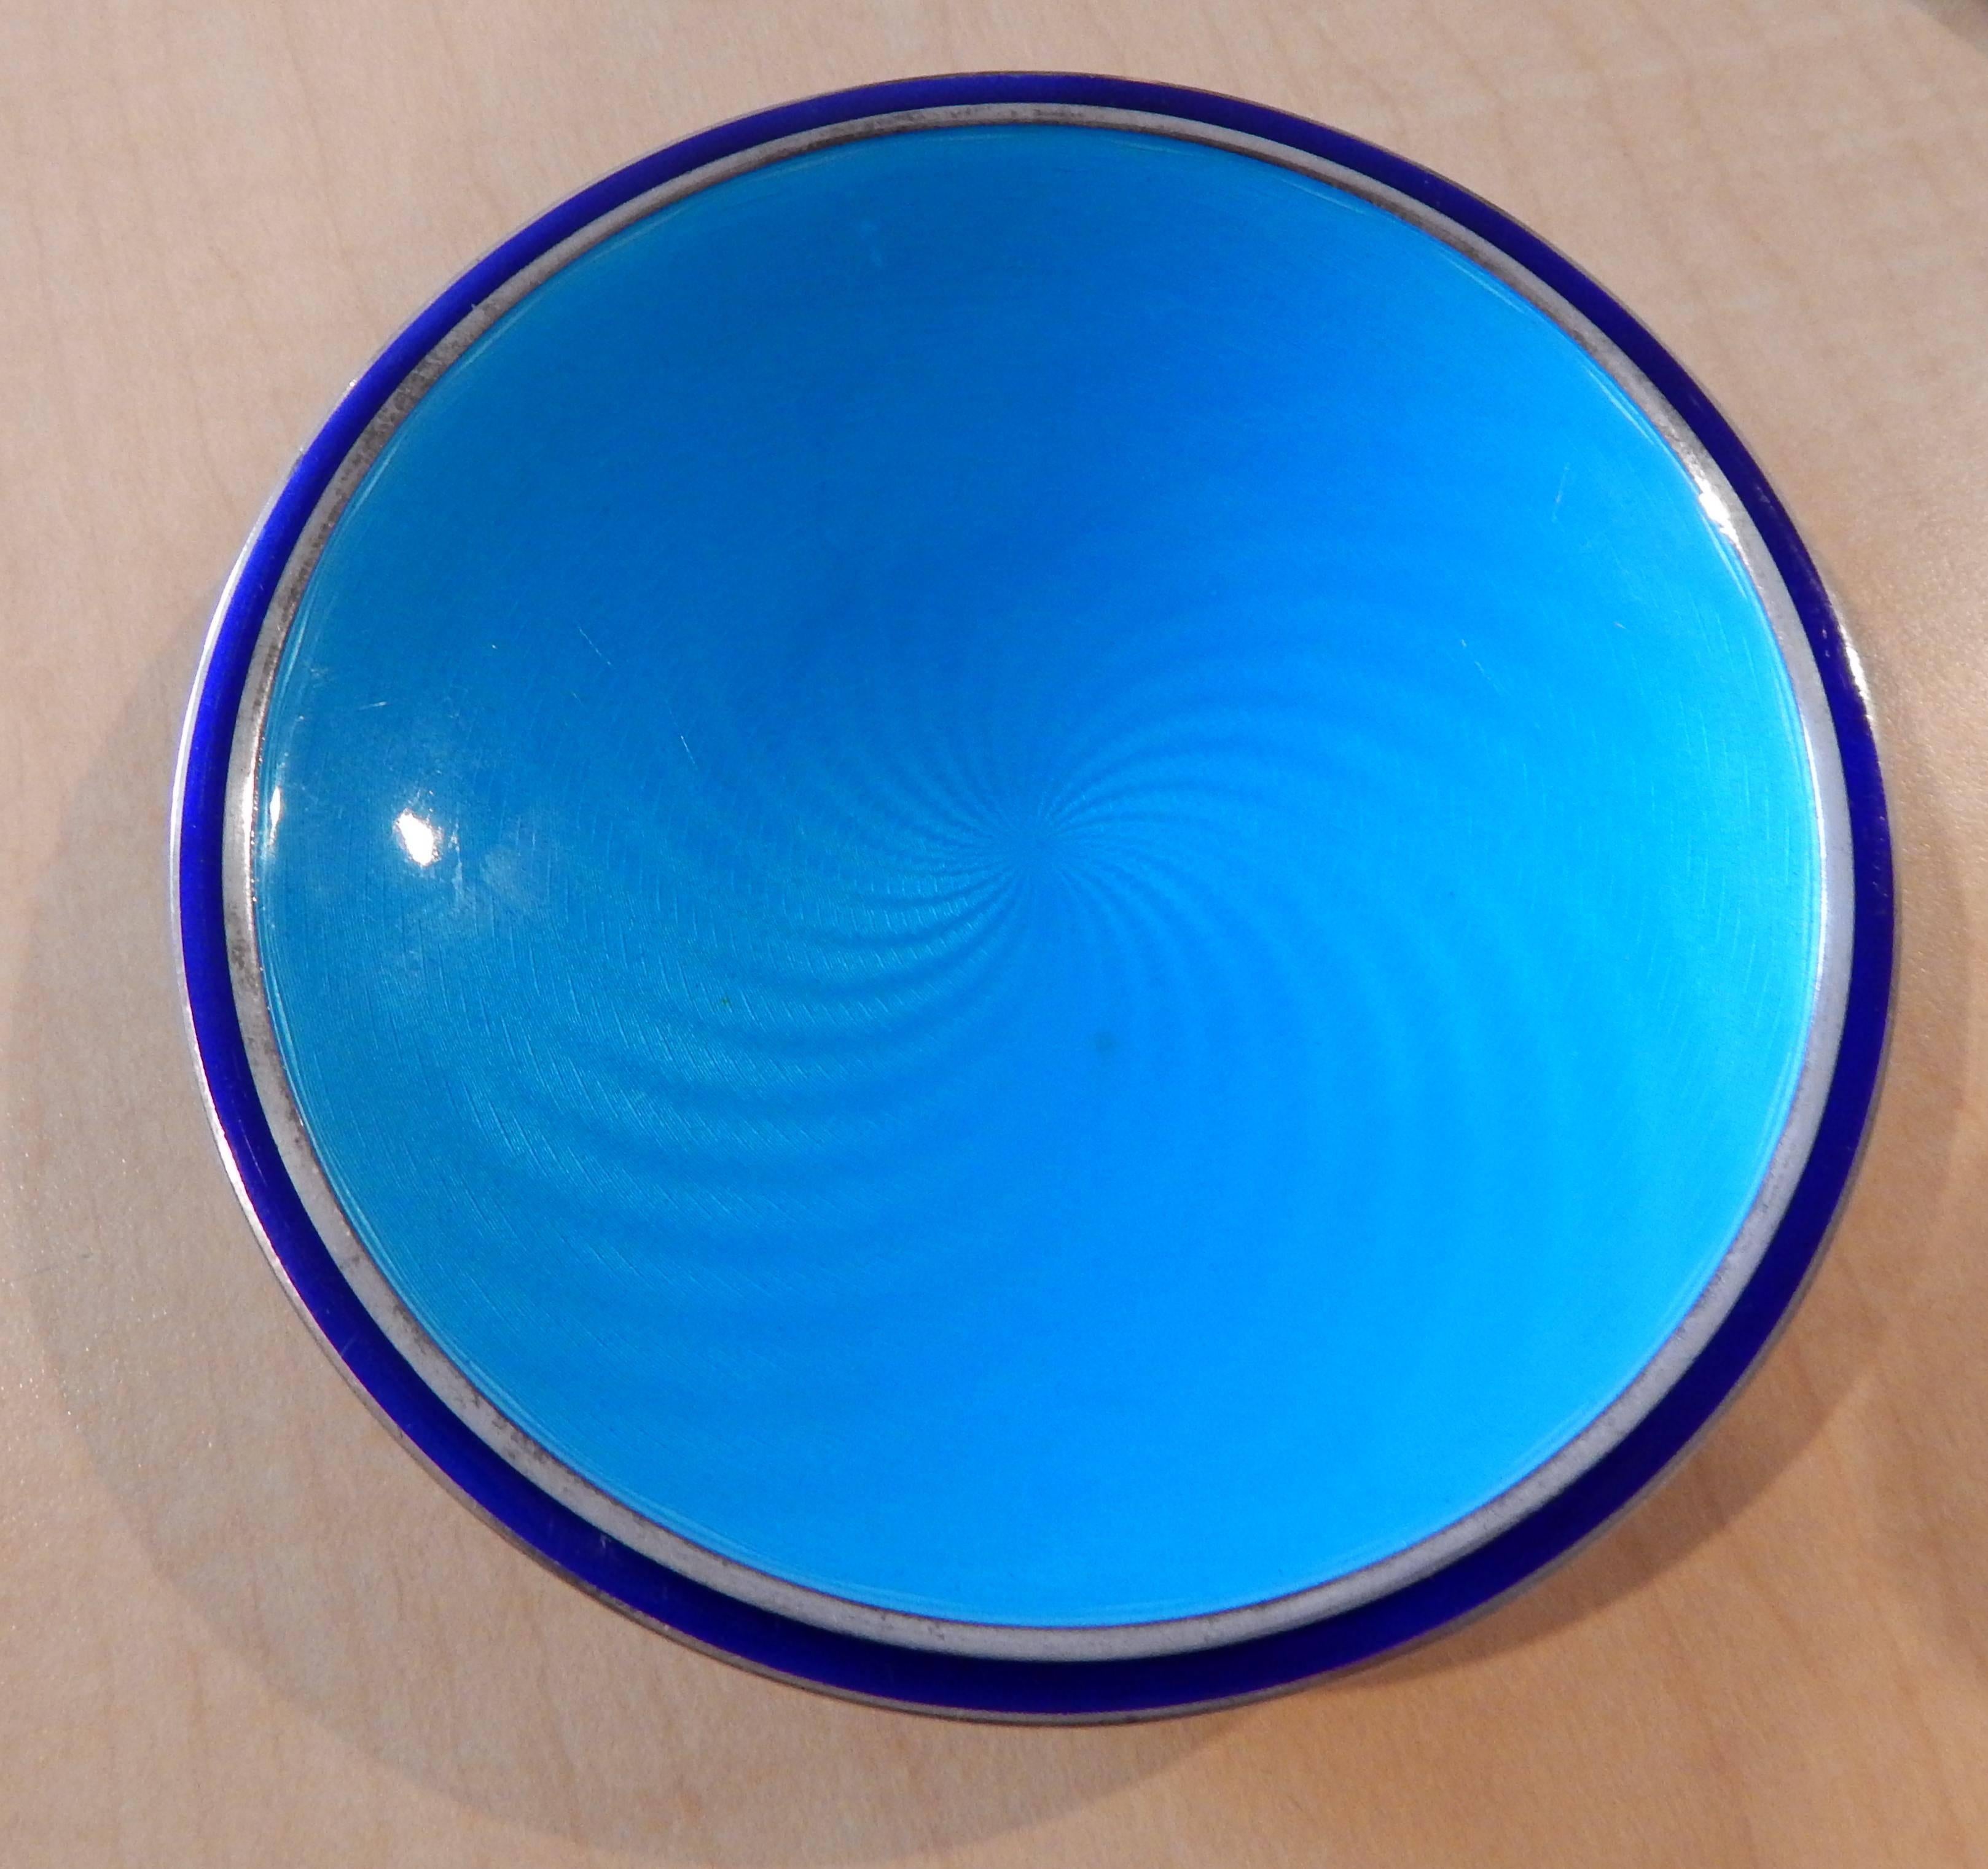 Modernist enamel tray or small plate.
Stamped on the bottom: Sterling, Norway, J. Tostrup.
Also bears two monograms. 
Beautiful shades of blue with swirl design.
Excellent condition.
Measures 3/4